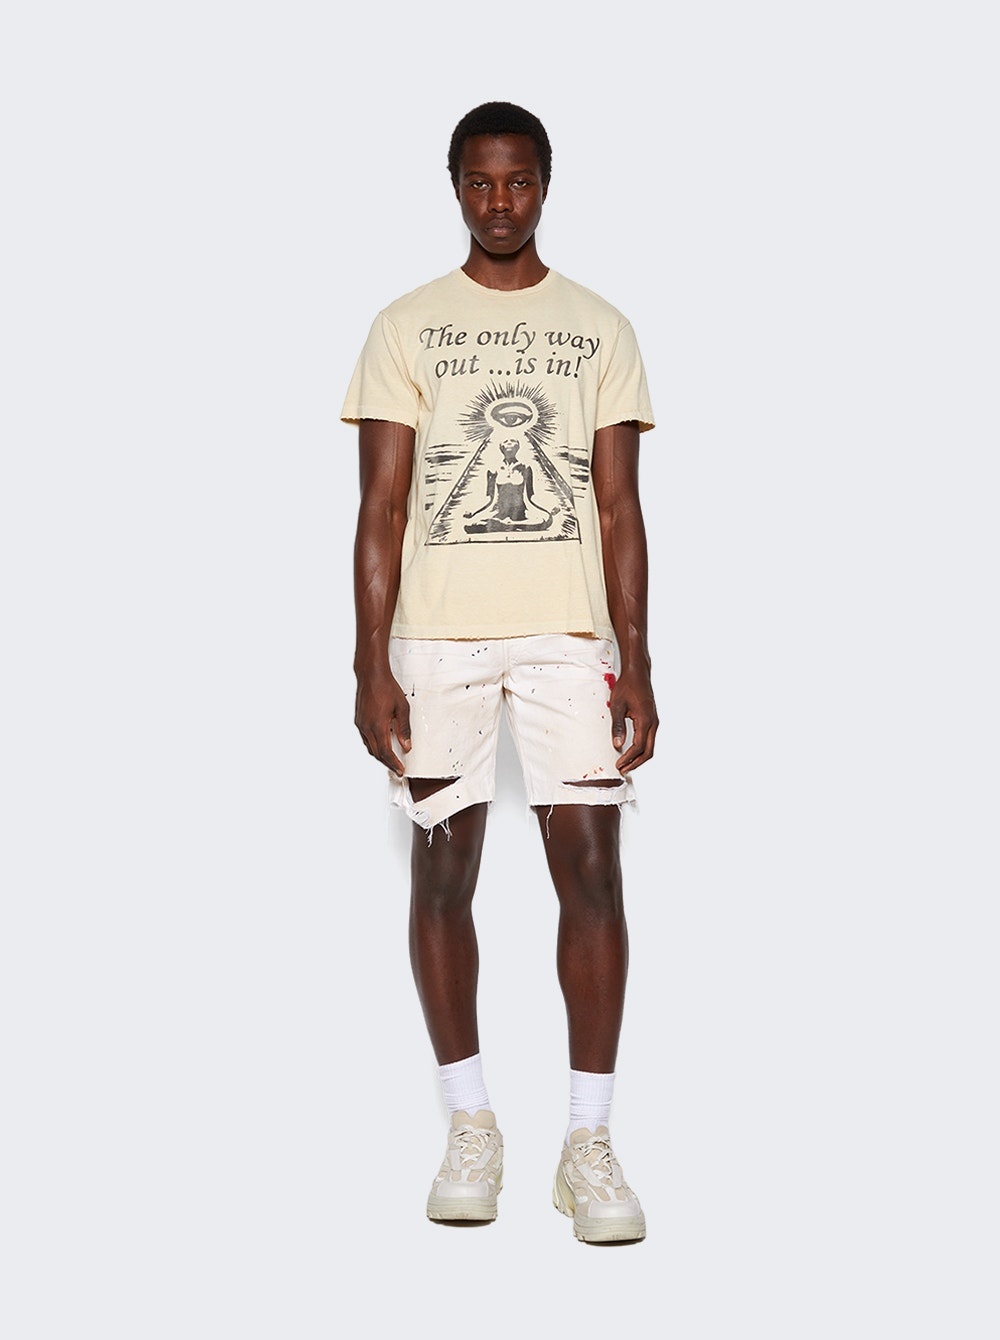 Only Way Out Tee Antique White - 2